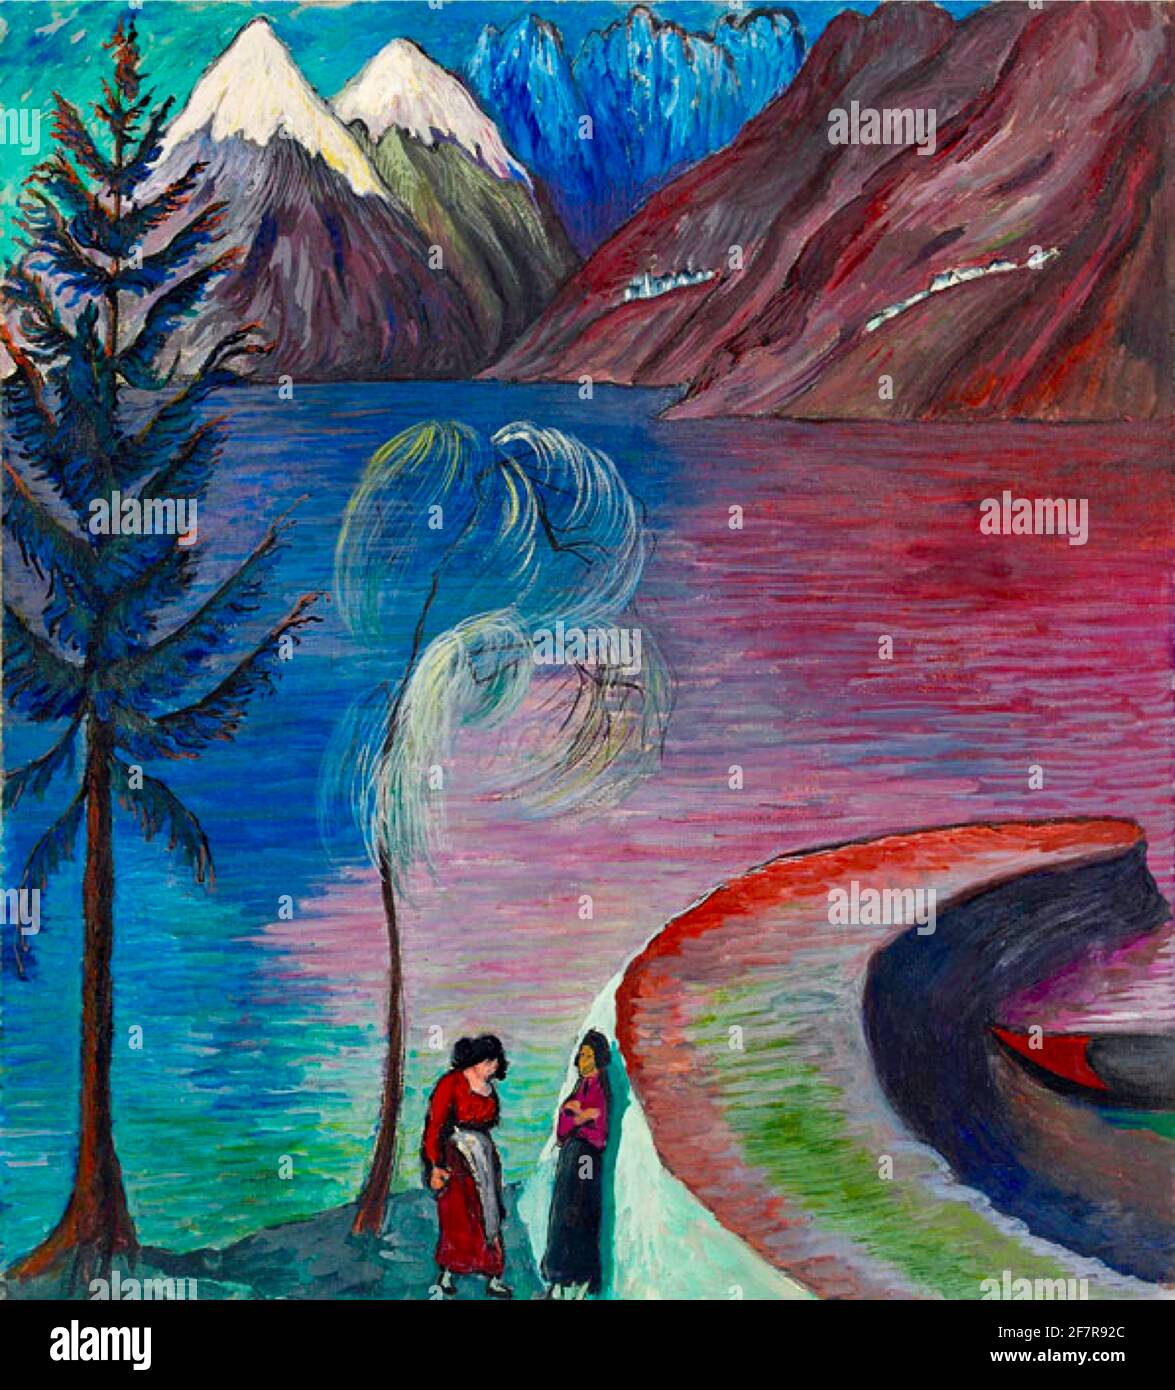 Marianne von Werefkin artwork entitled At Dawn. Two women converse by the jetty. Vibrantly coloured landscape with snow capped mountains in the distance. Stock Photo